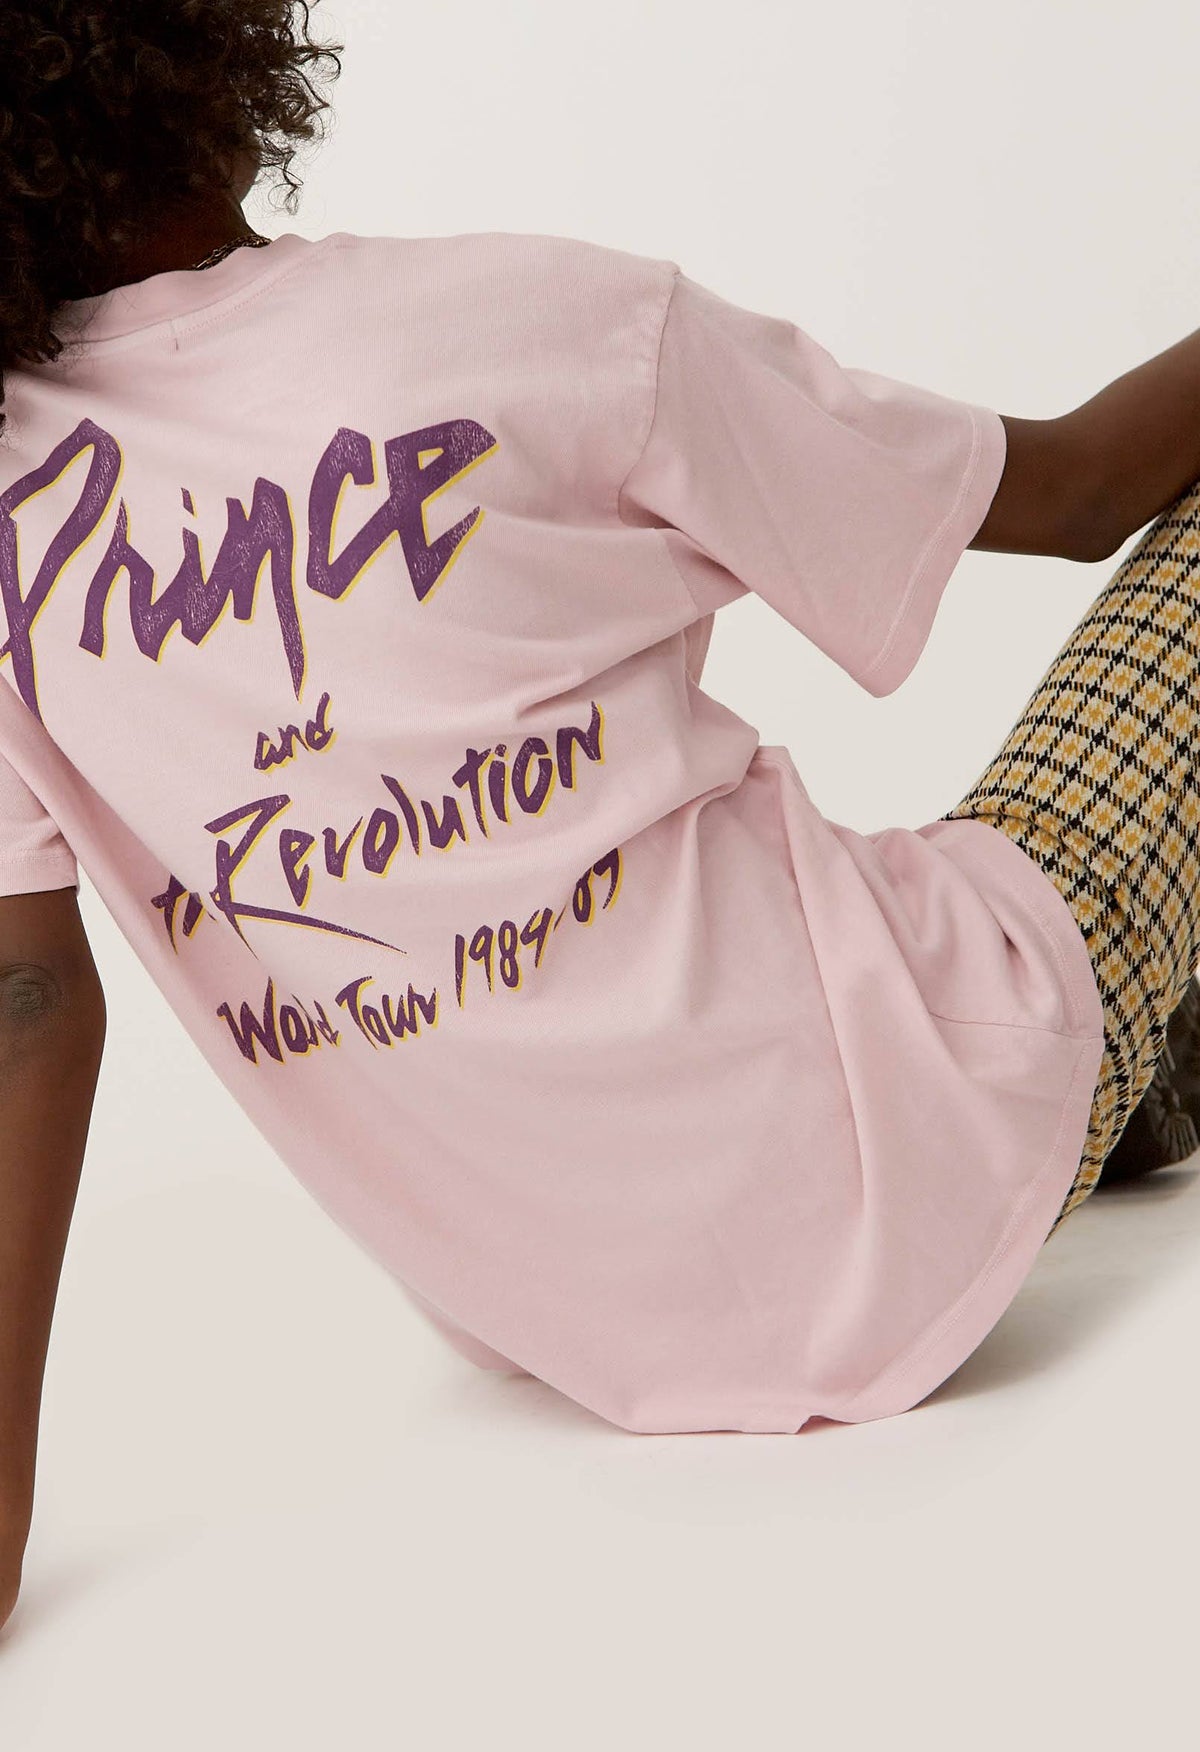 Daydreamer - Prince And The Revolution Weekend Tee